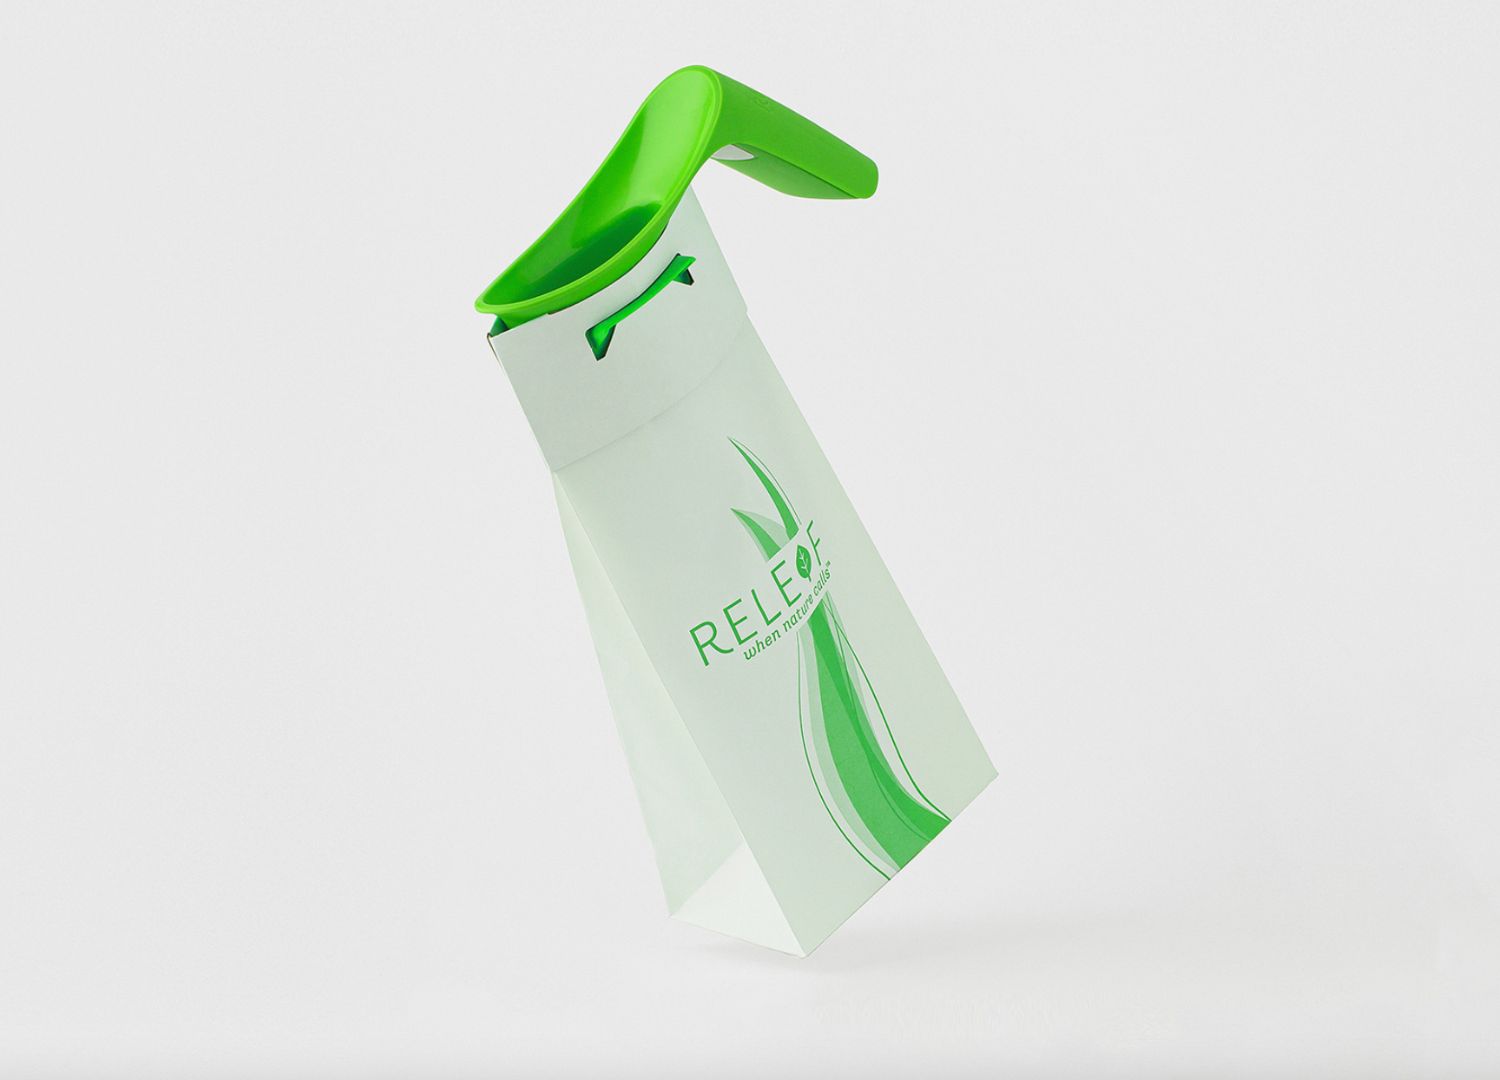 Releaf Freedom by Tone Product Design